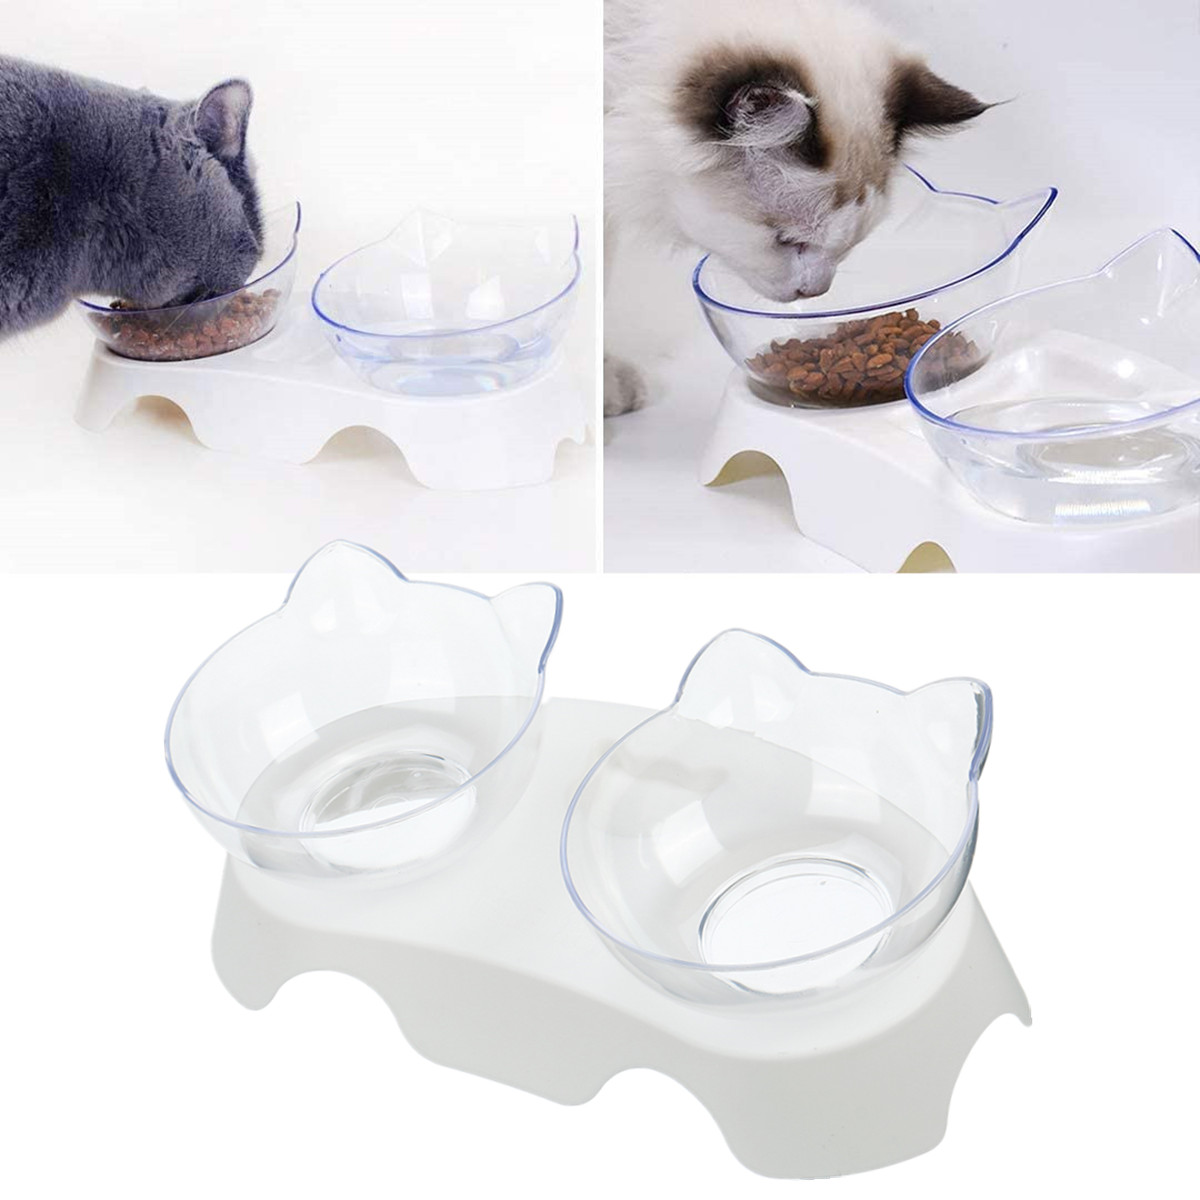 Kitty bowl stabilizer for generic 1 cup cat bowl from Wal mart